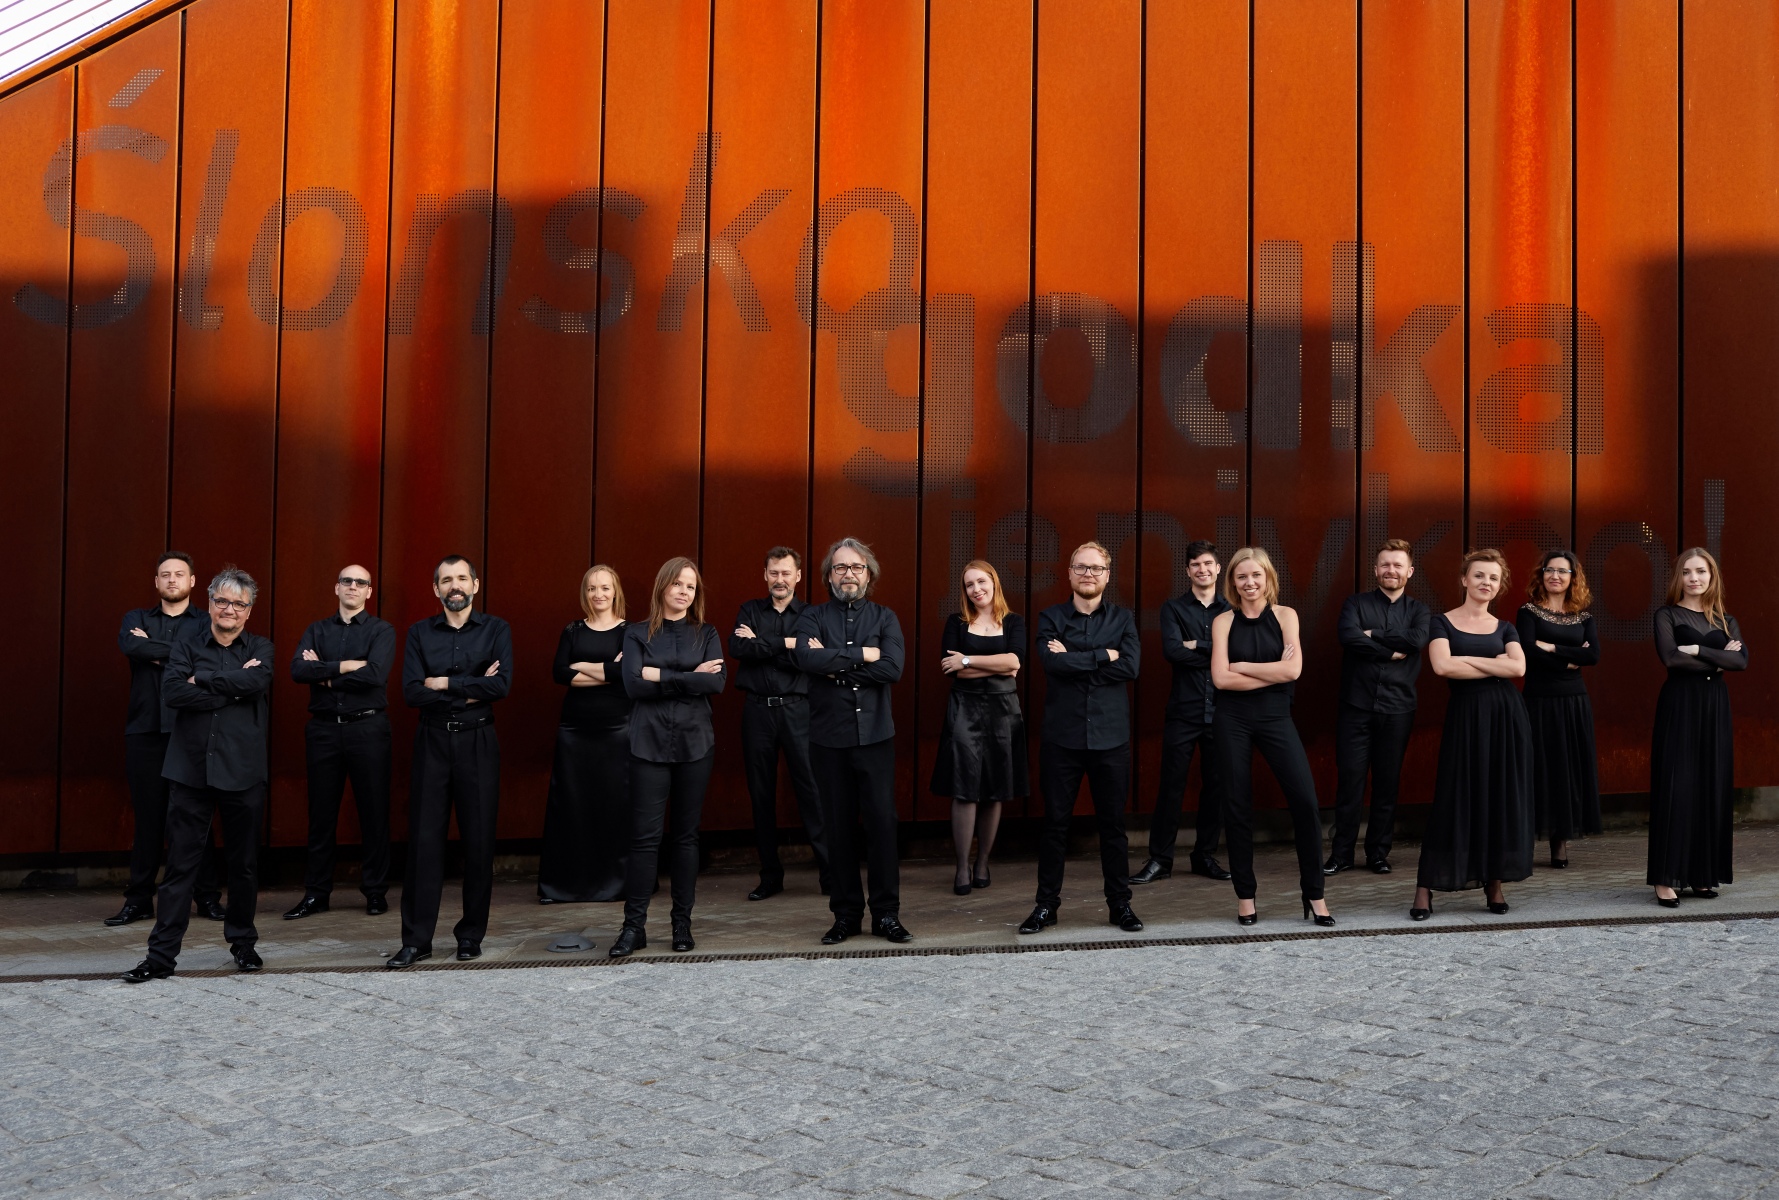 The Silesian Chamber Orchestra 